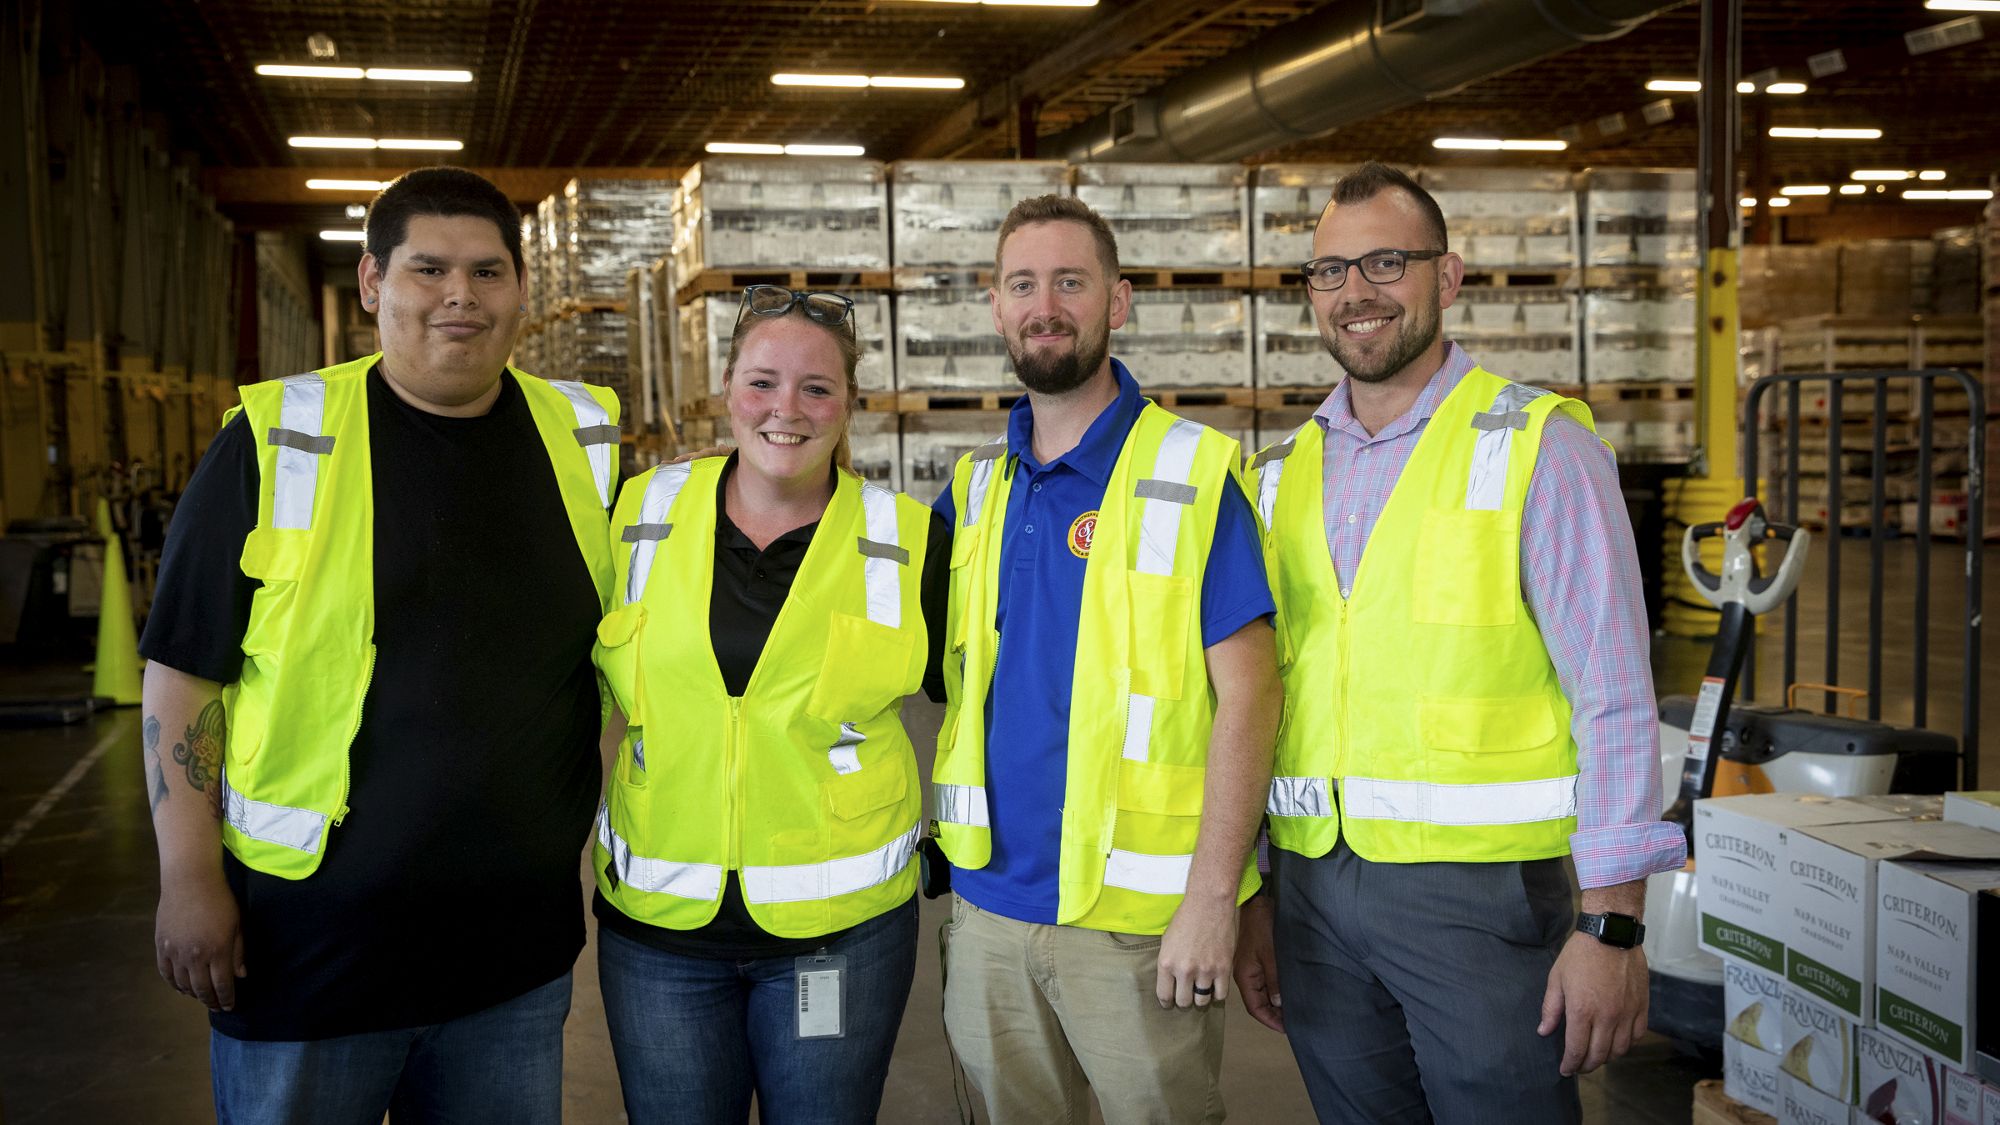 Four distribution center workers standing together